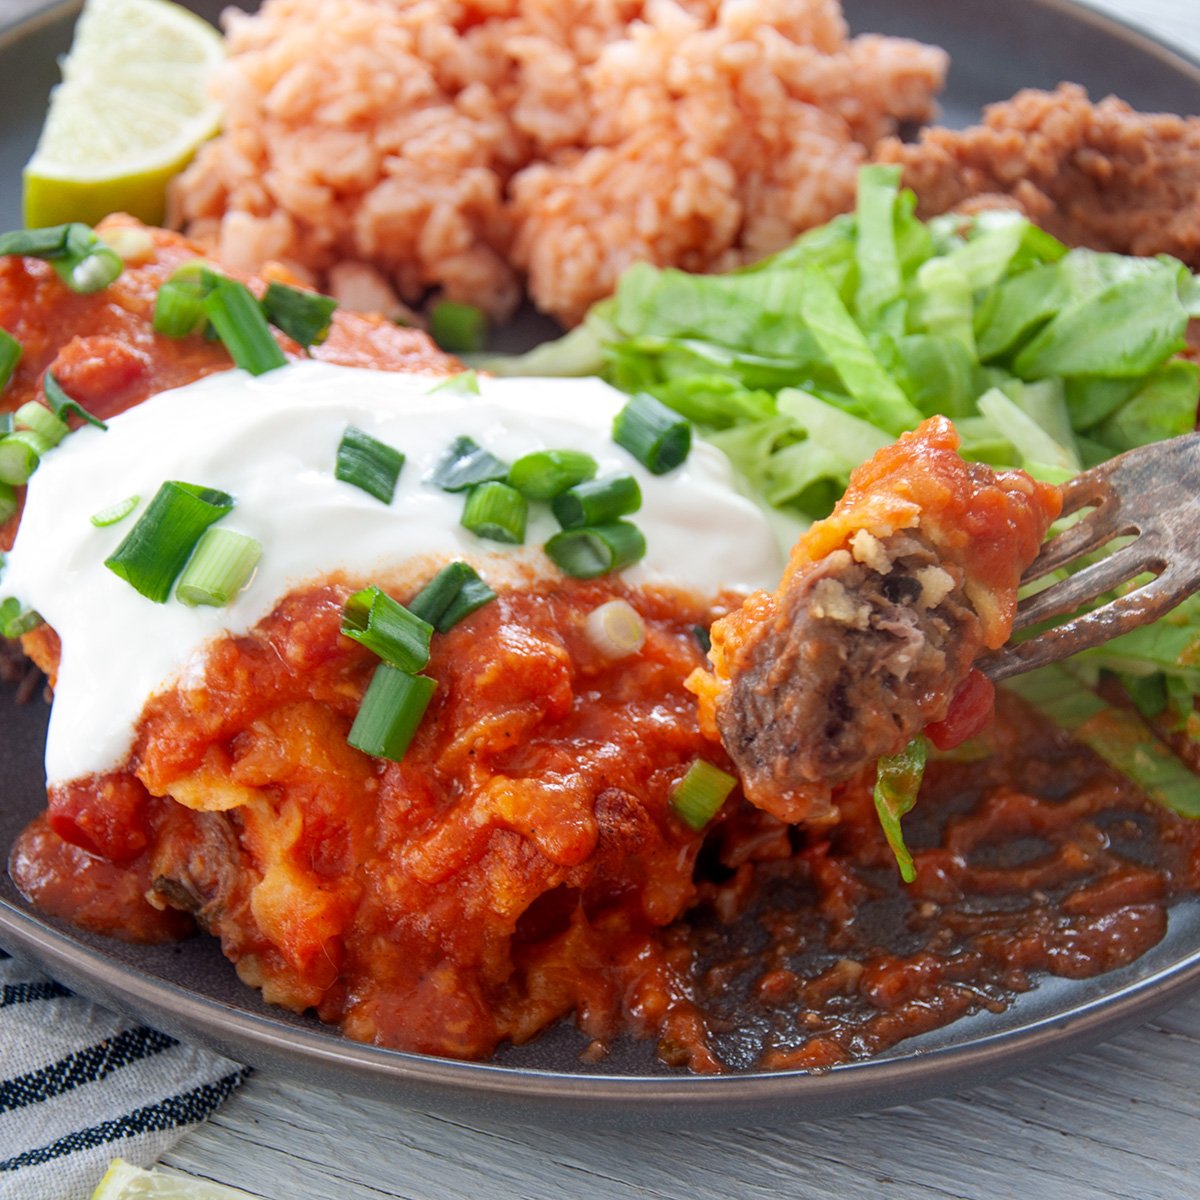 A fork with a single bite of shredded beef enchilada with the whole serving plate behind it.